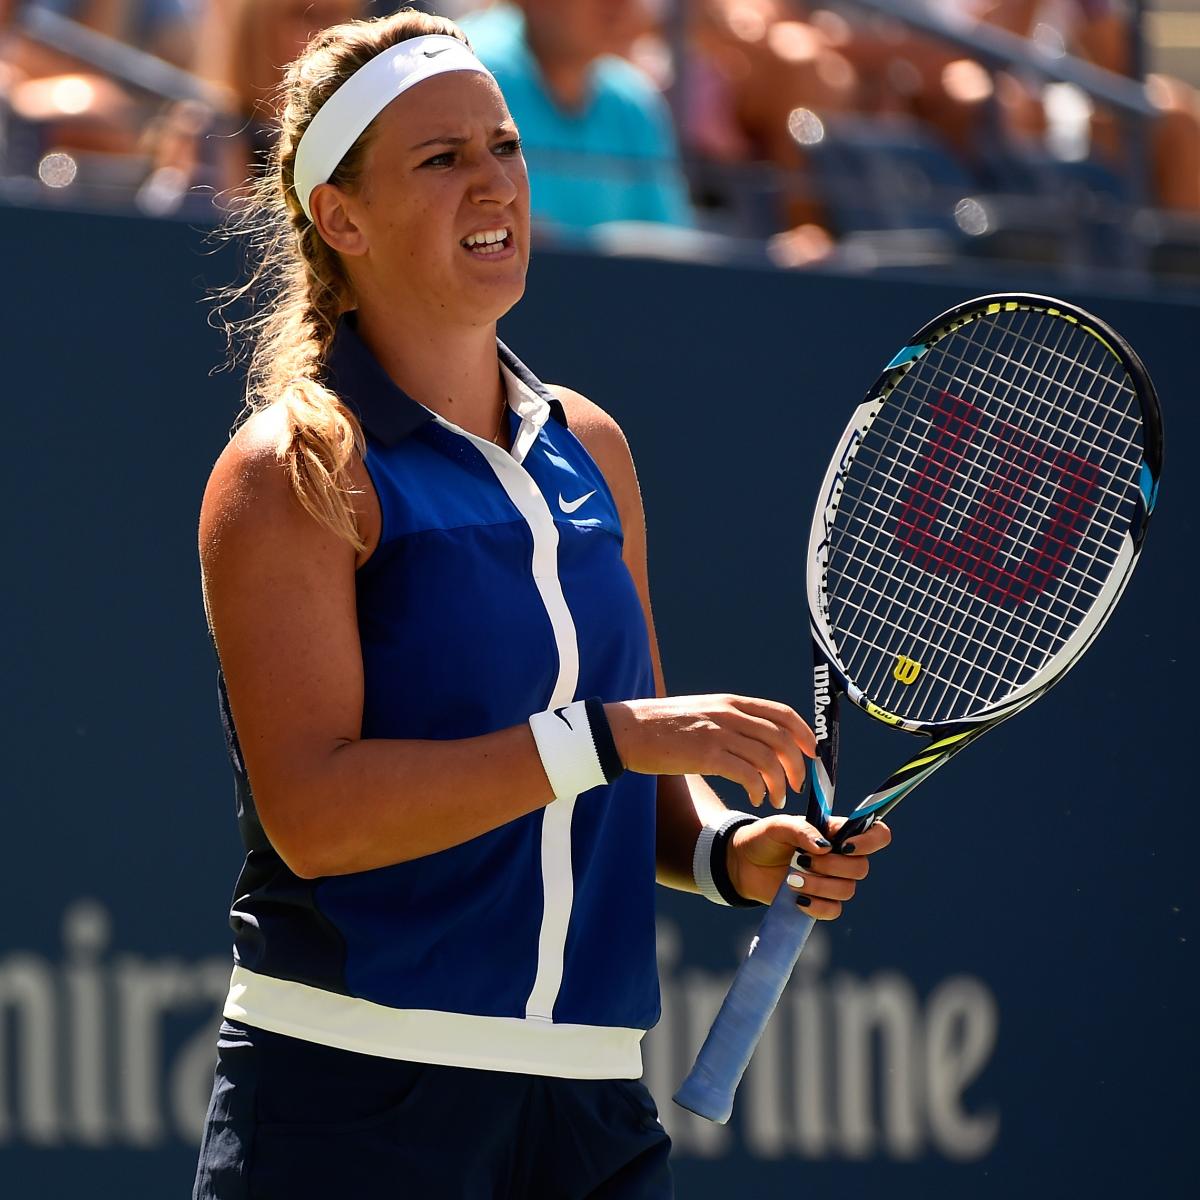 US Open Tennis 2014 Early Results, Highlights and Scores Recap from